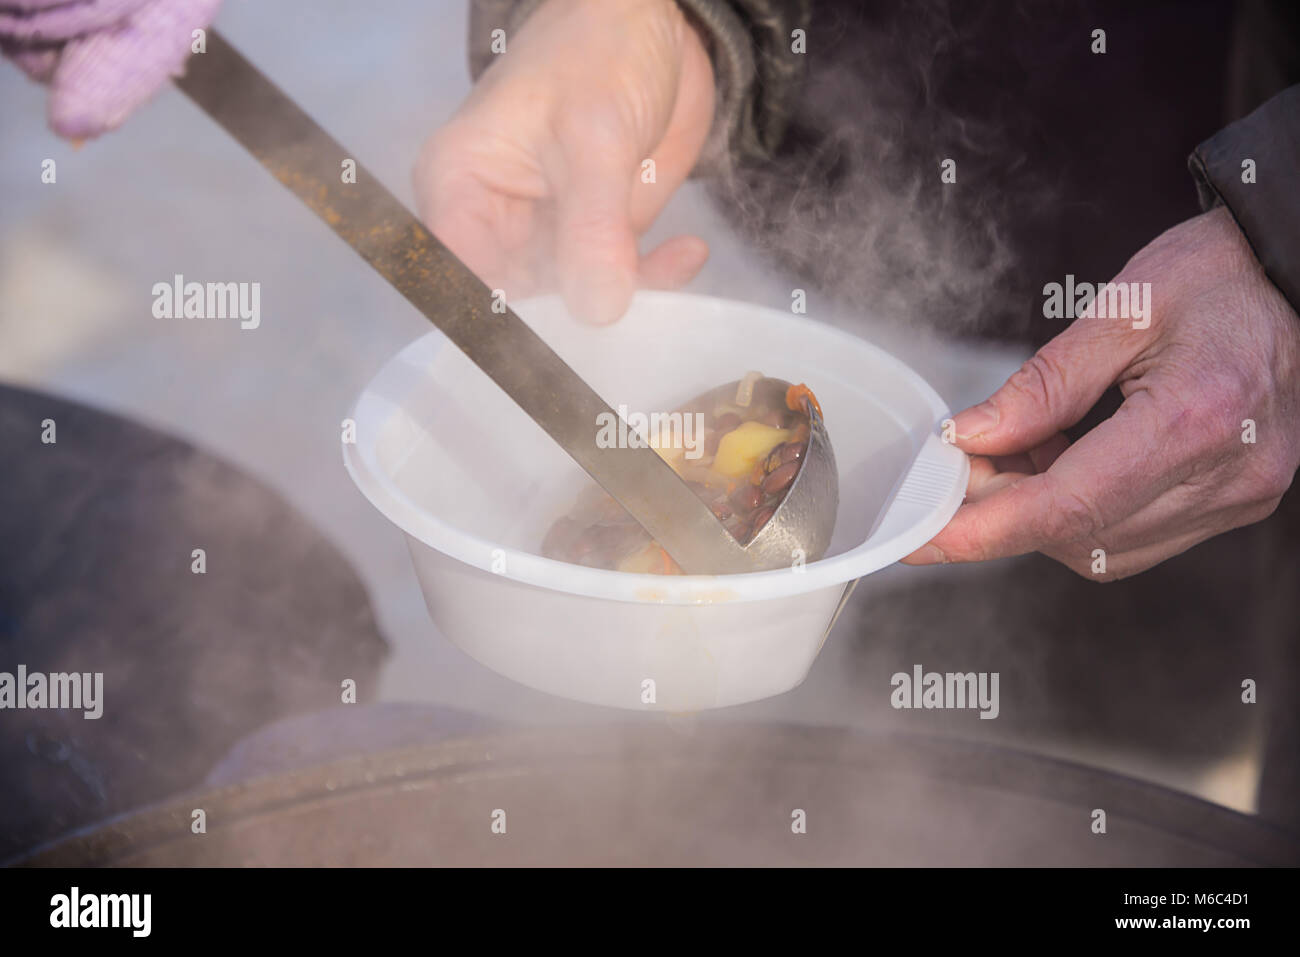 feeding homeless people on the street, social problems, hungry people eat Stock Photo